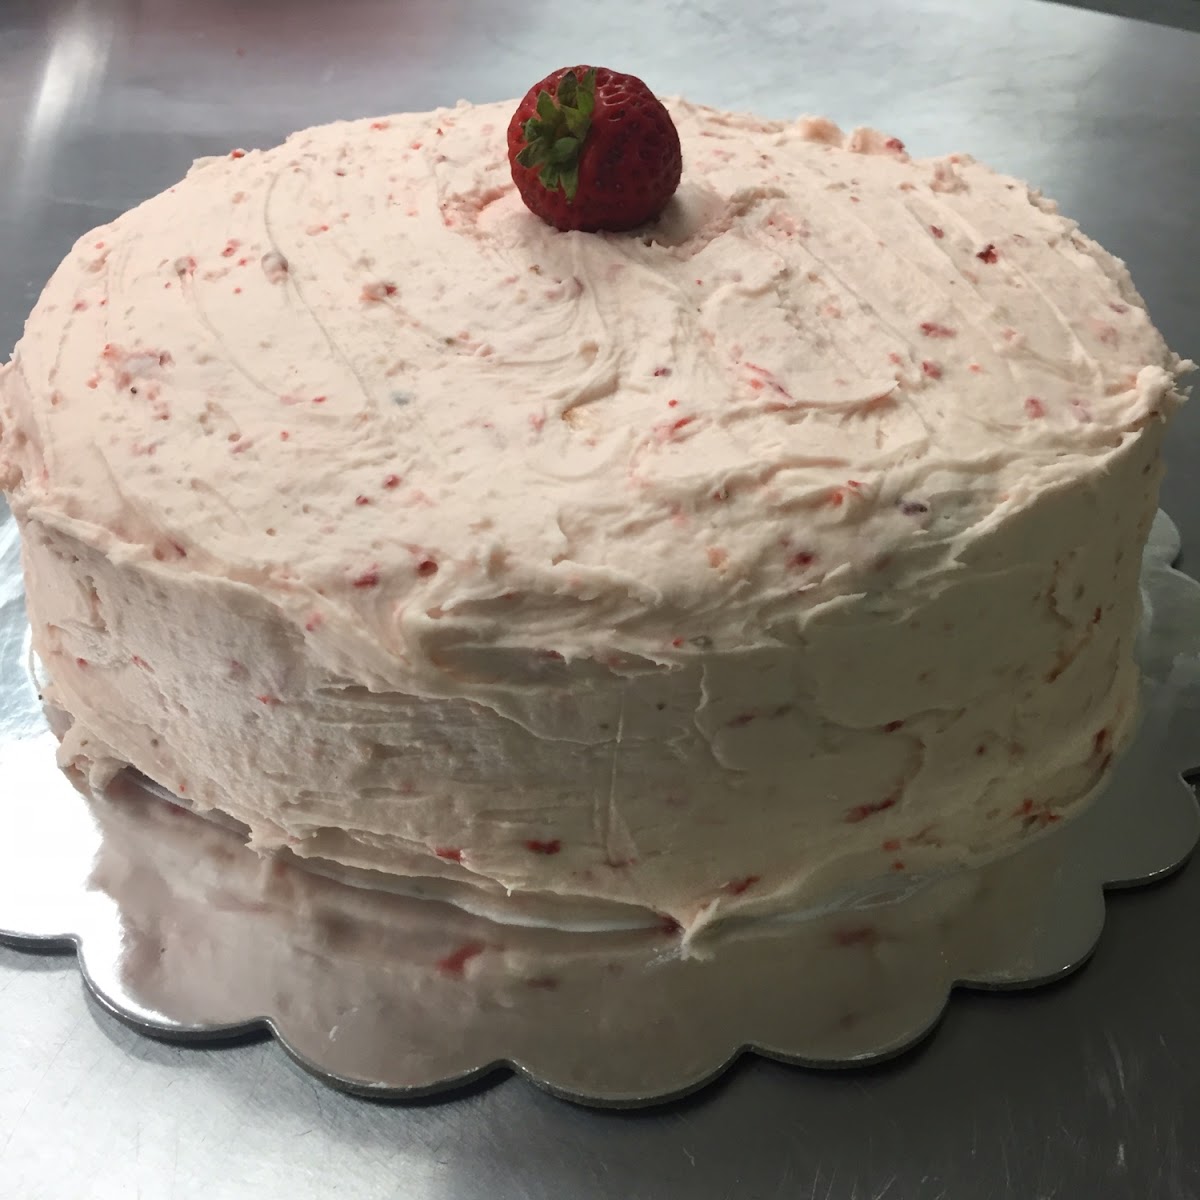 Chocolate cake with strawberry frosting